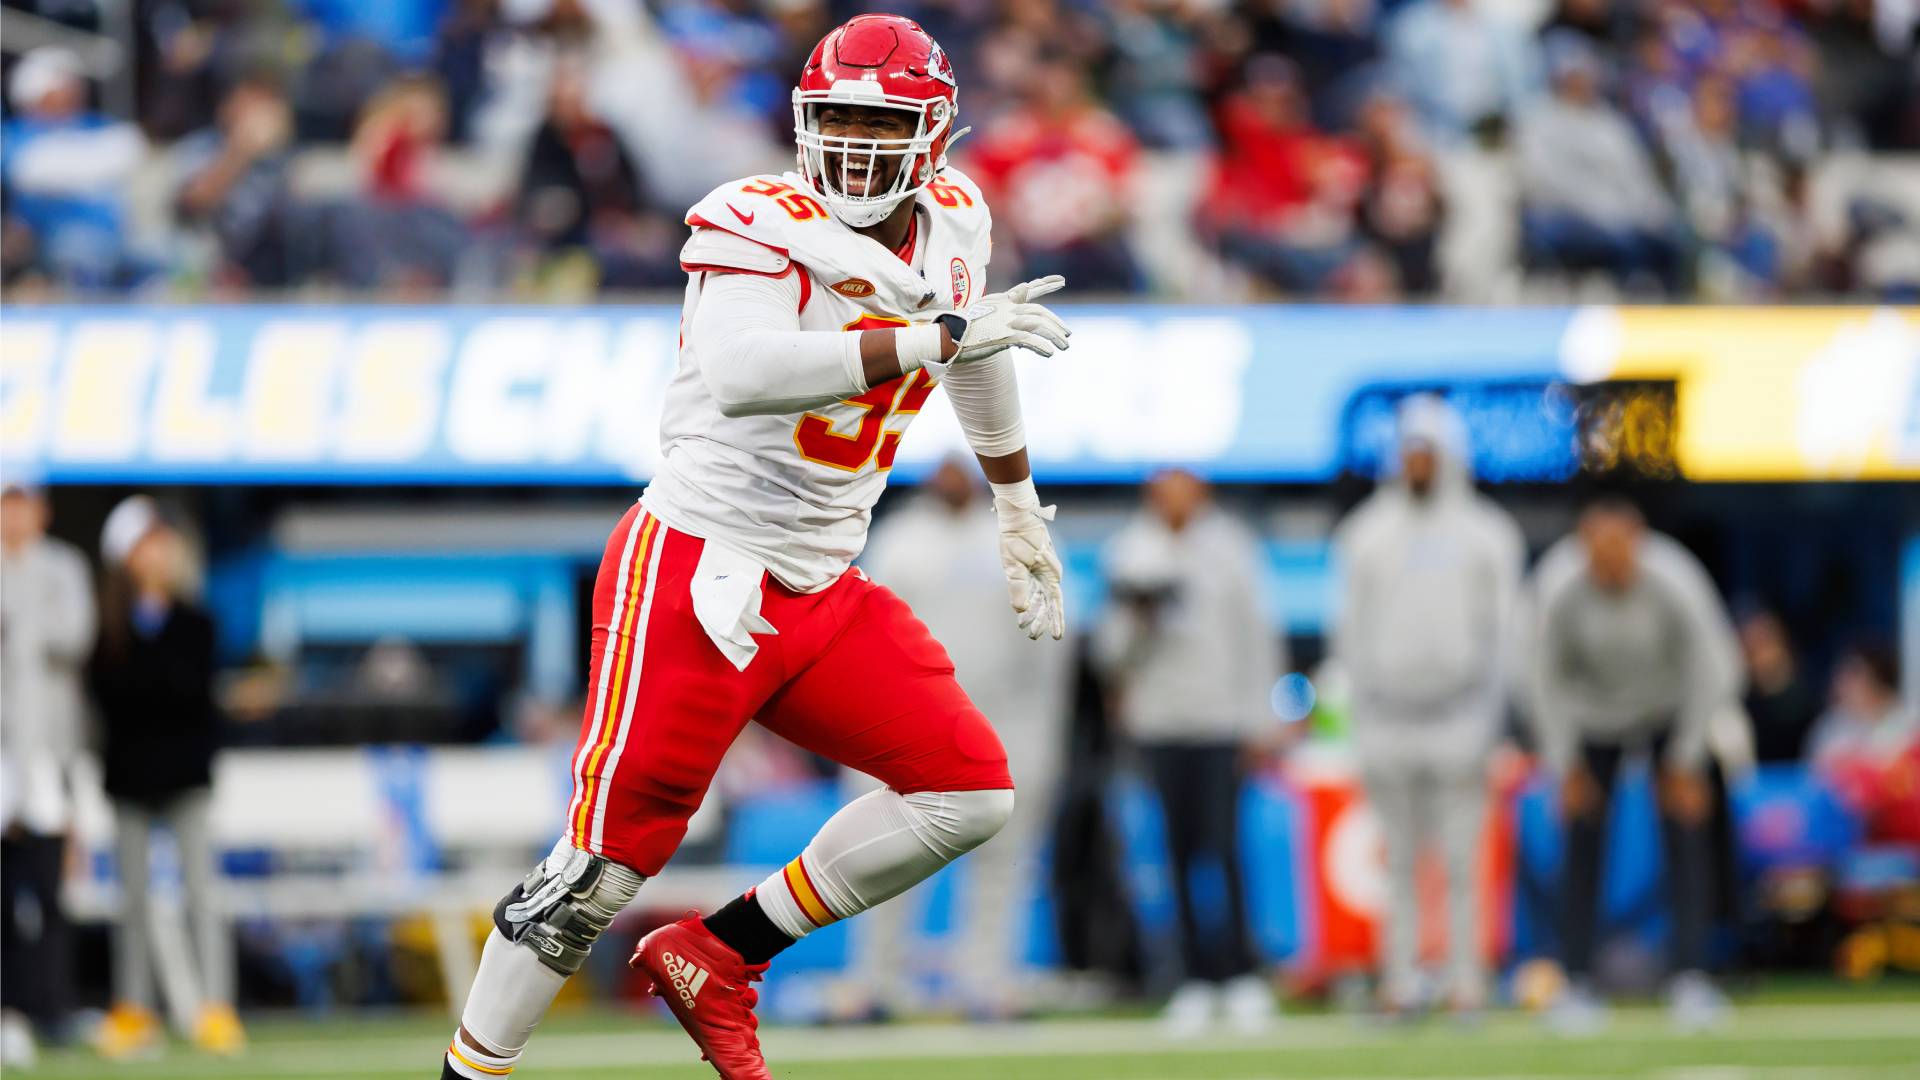 nfl franchise tag candidates with kansas city chiefs among teams with big decisions as window opens